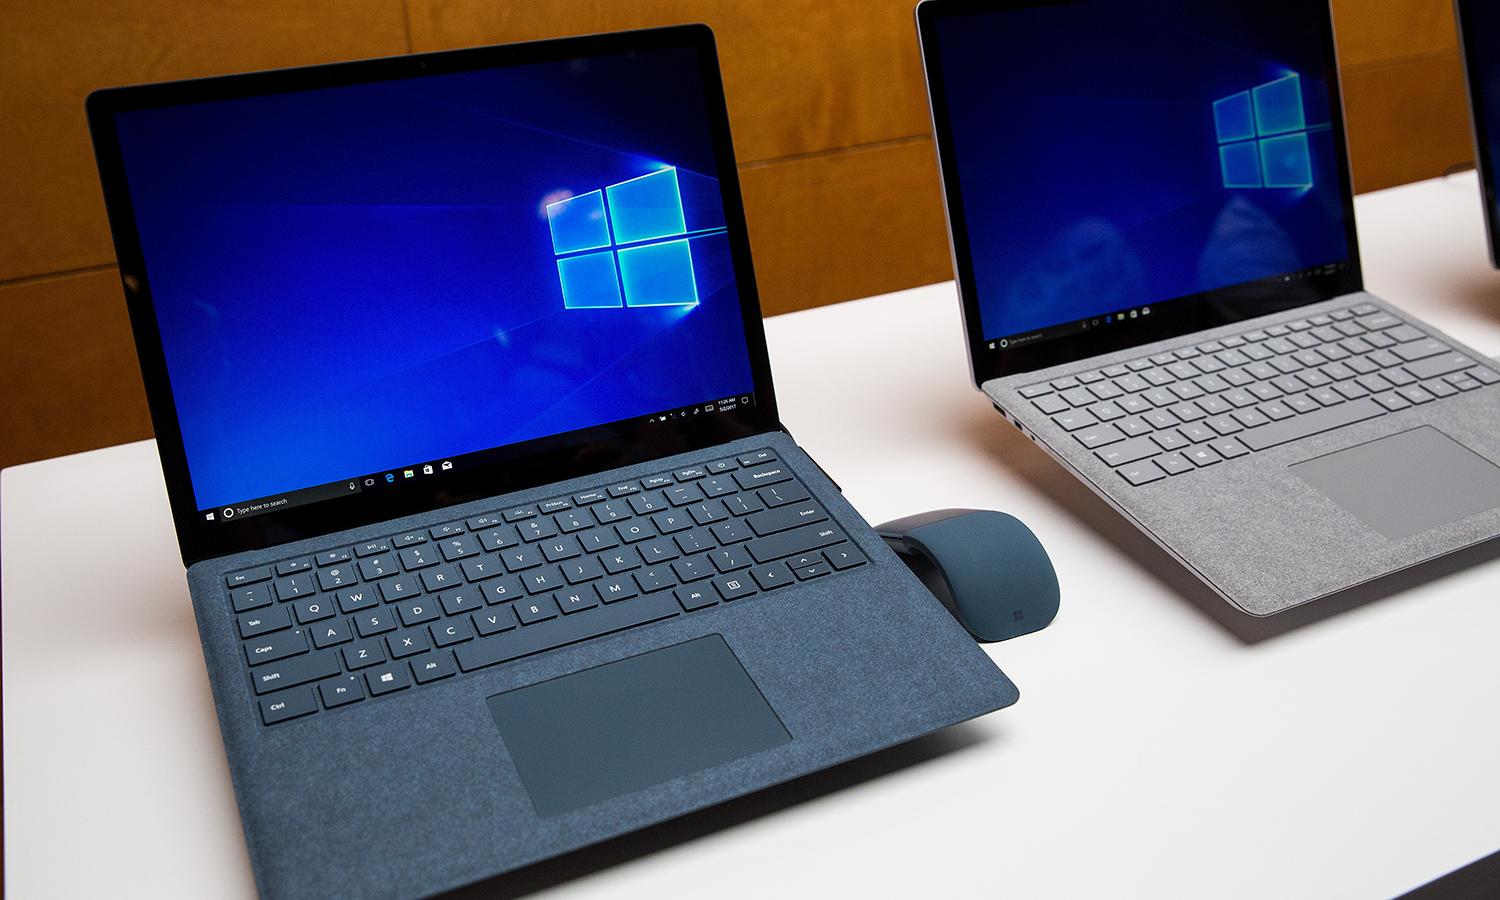 Two Microsoft Surface laptops are seen